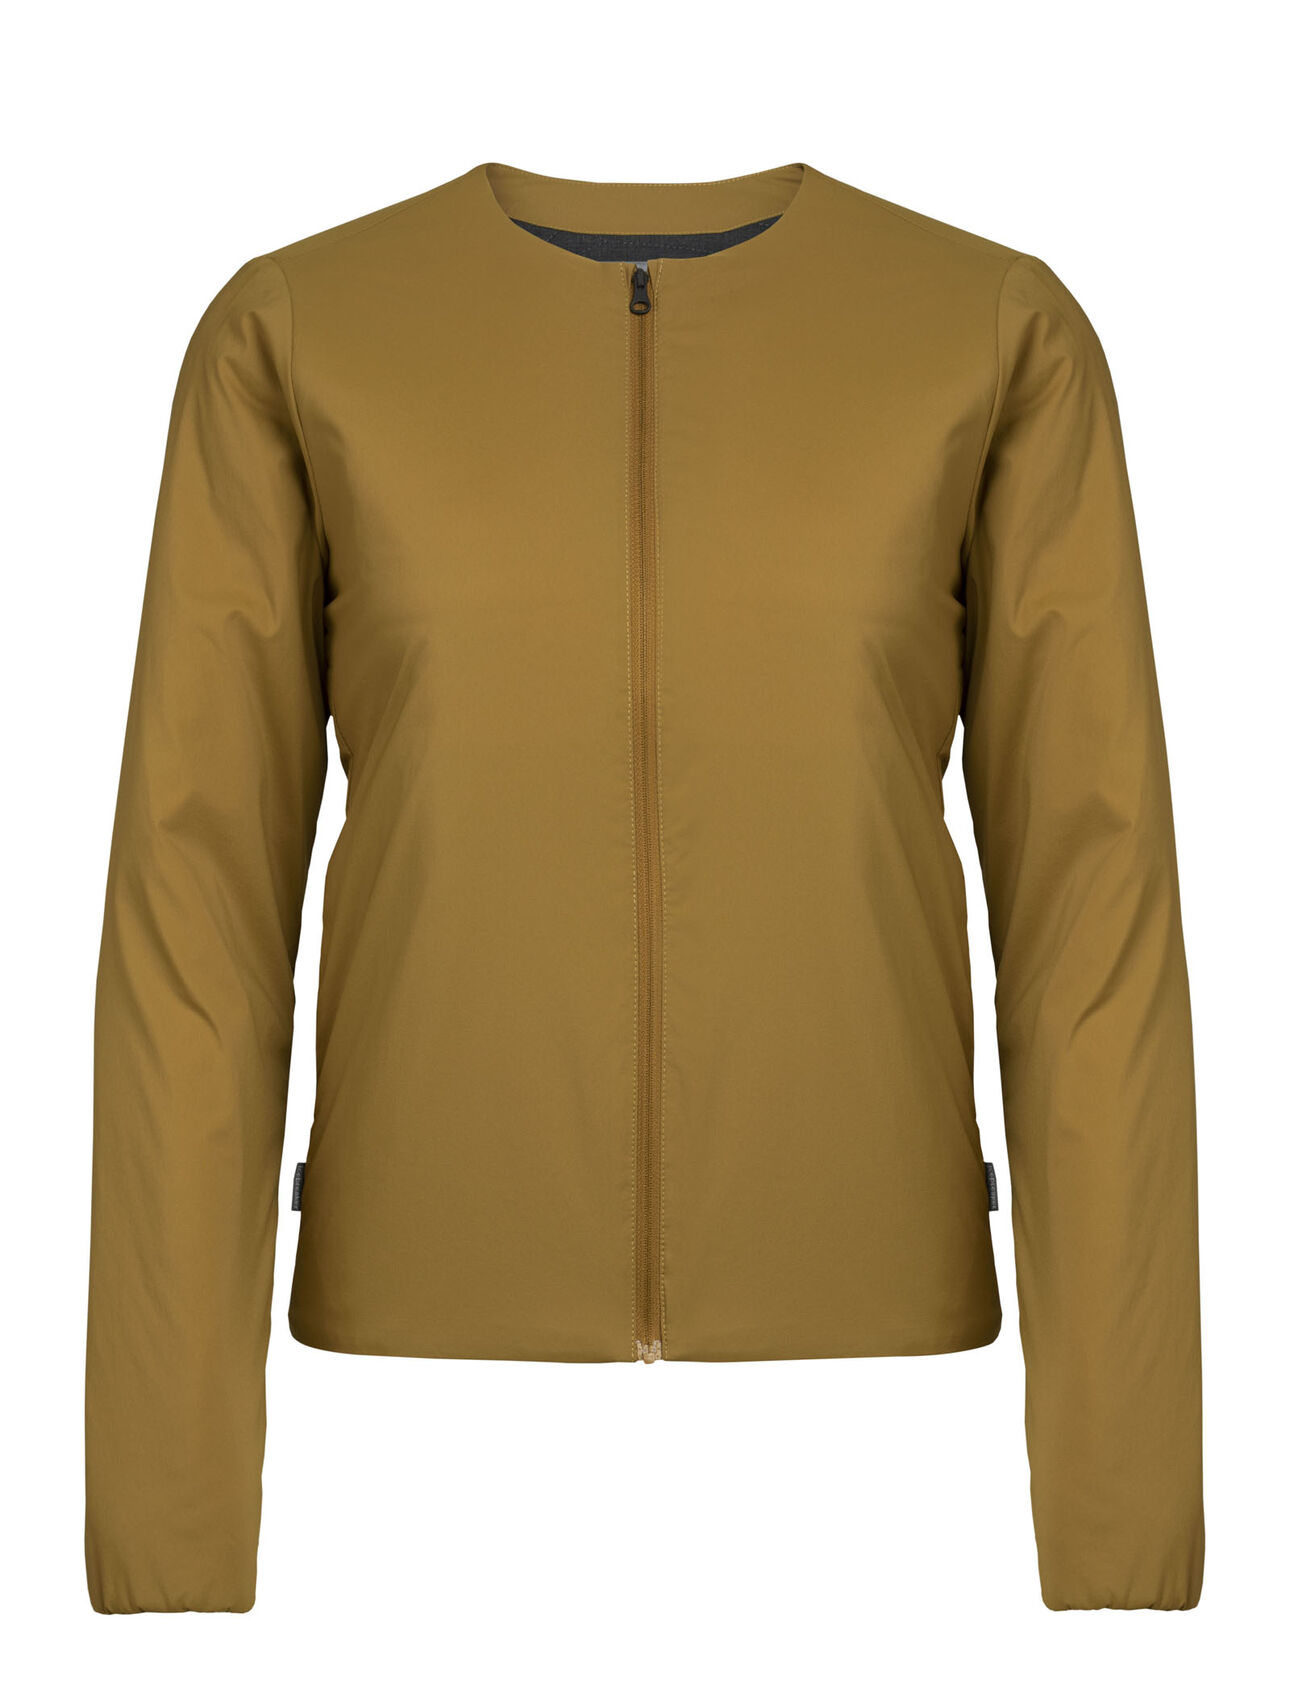 Womens MerinoLoft™ Ainsworth Liner Jacket  A warm, versatile insulated layer featuring our MerinoLoft™ insulation, the Ainsworth Liner Jacket functions alone in cool conditions and snaps into our Ainsworth Hooded Jacket for added protection from the elements. 